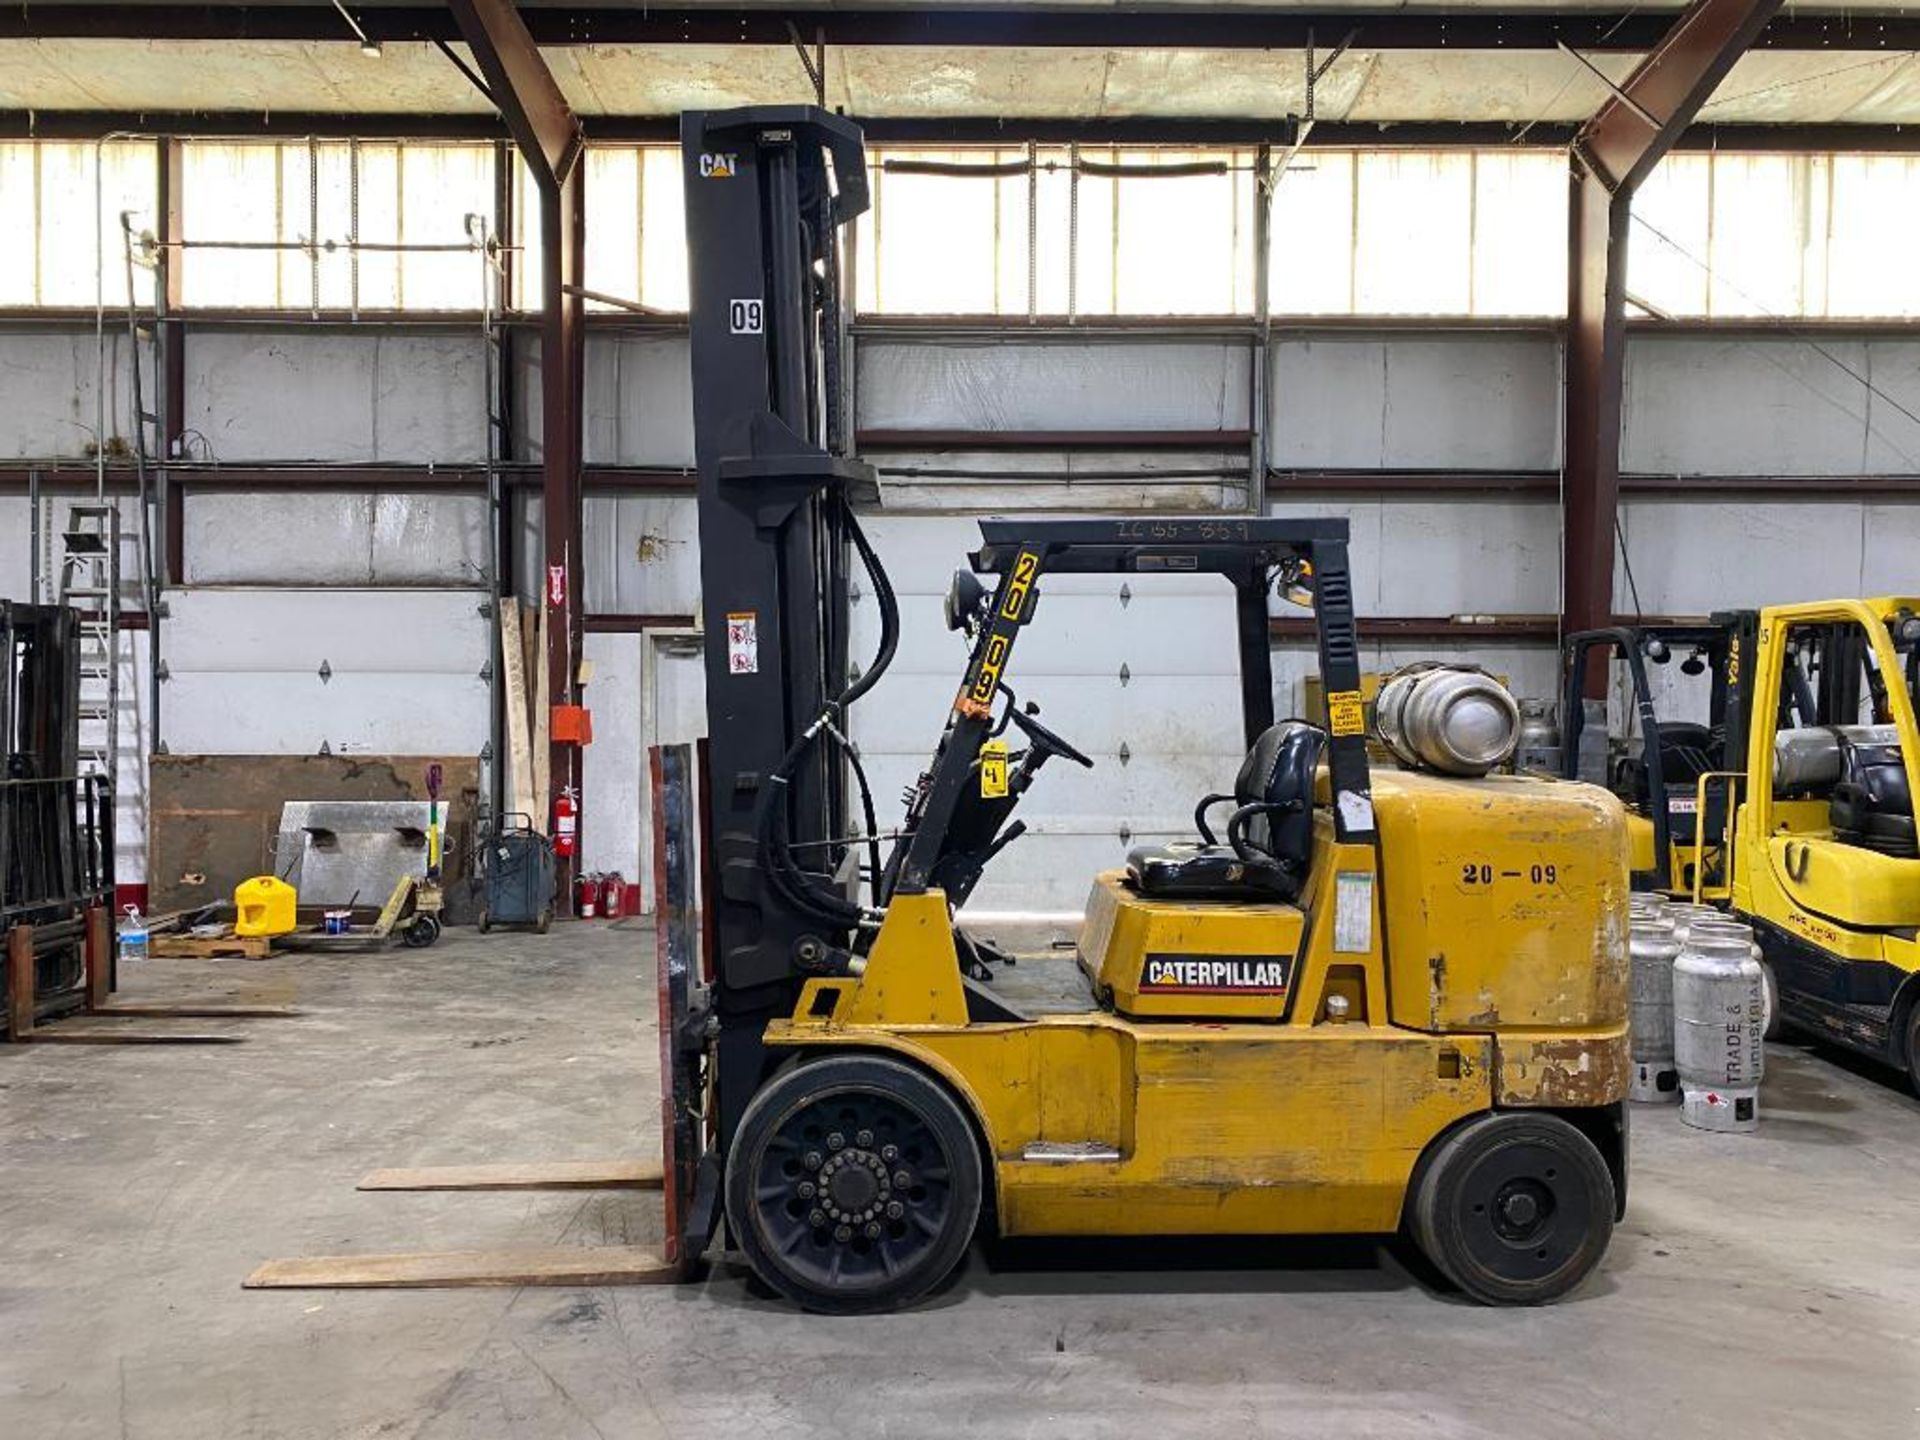 Caterpillar 15,500-LB. Capacity Forklift, Model GC70K, S/N AT8900859, LPG, Cushion Tires, 3-Stage Ma